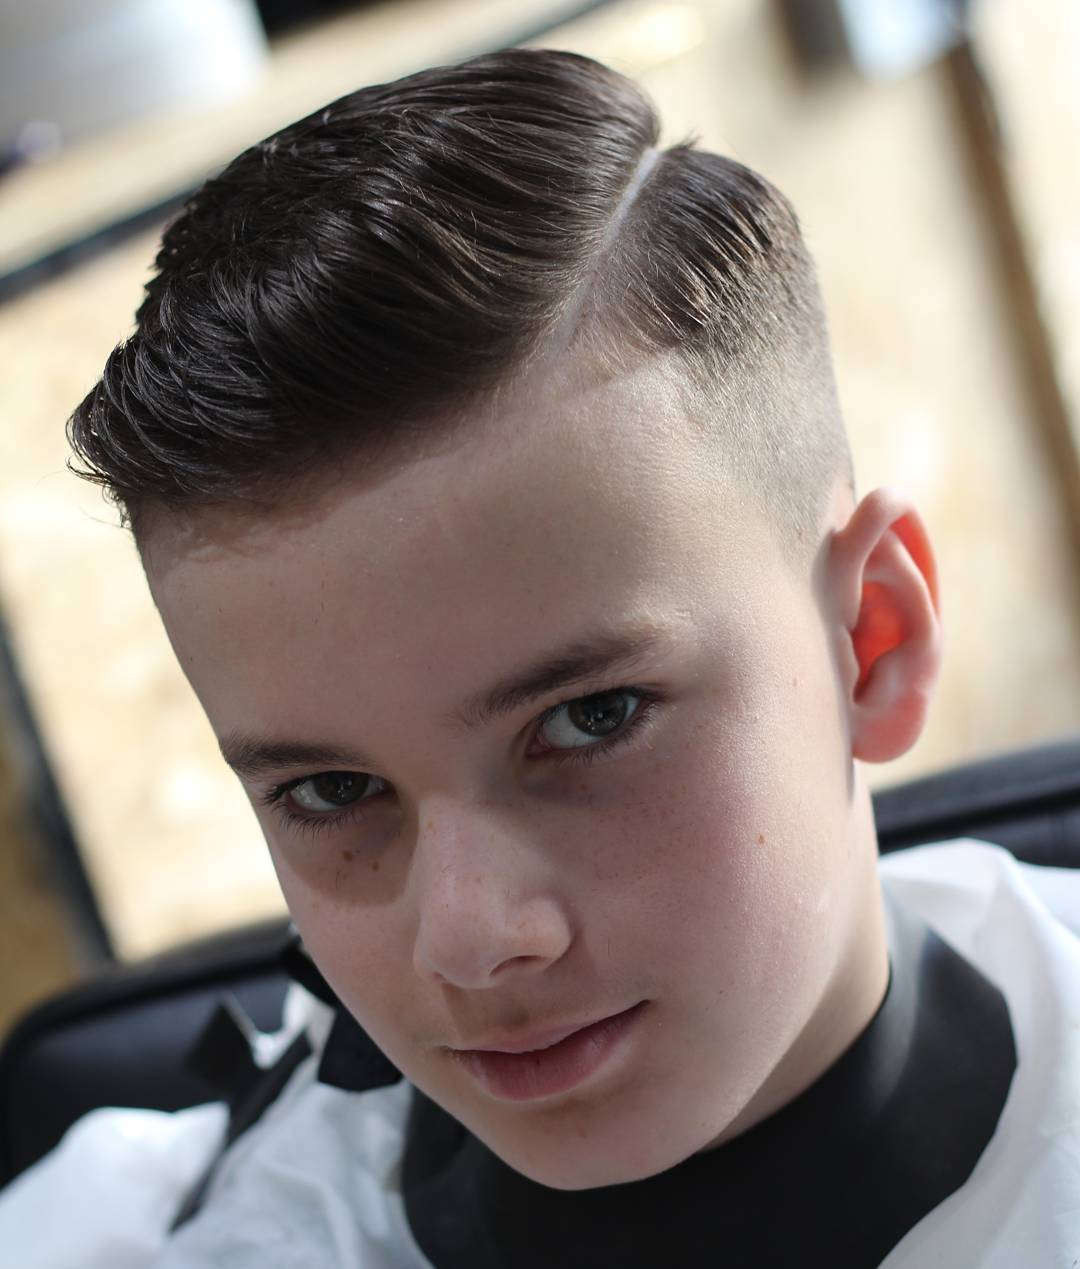 Boy Cut Hairstyles
 100 Excellent School Haircuts for Boys Styling Tips